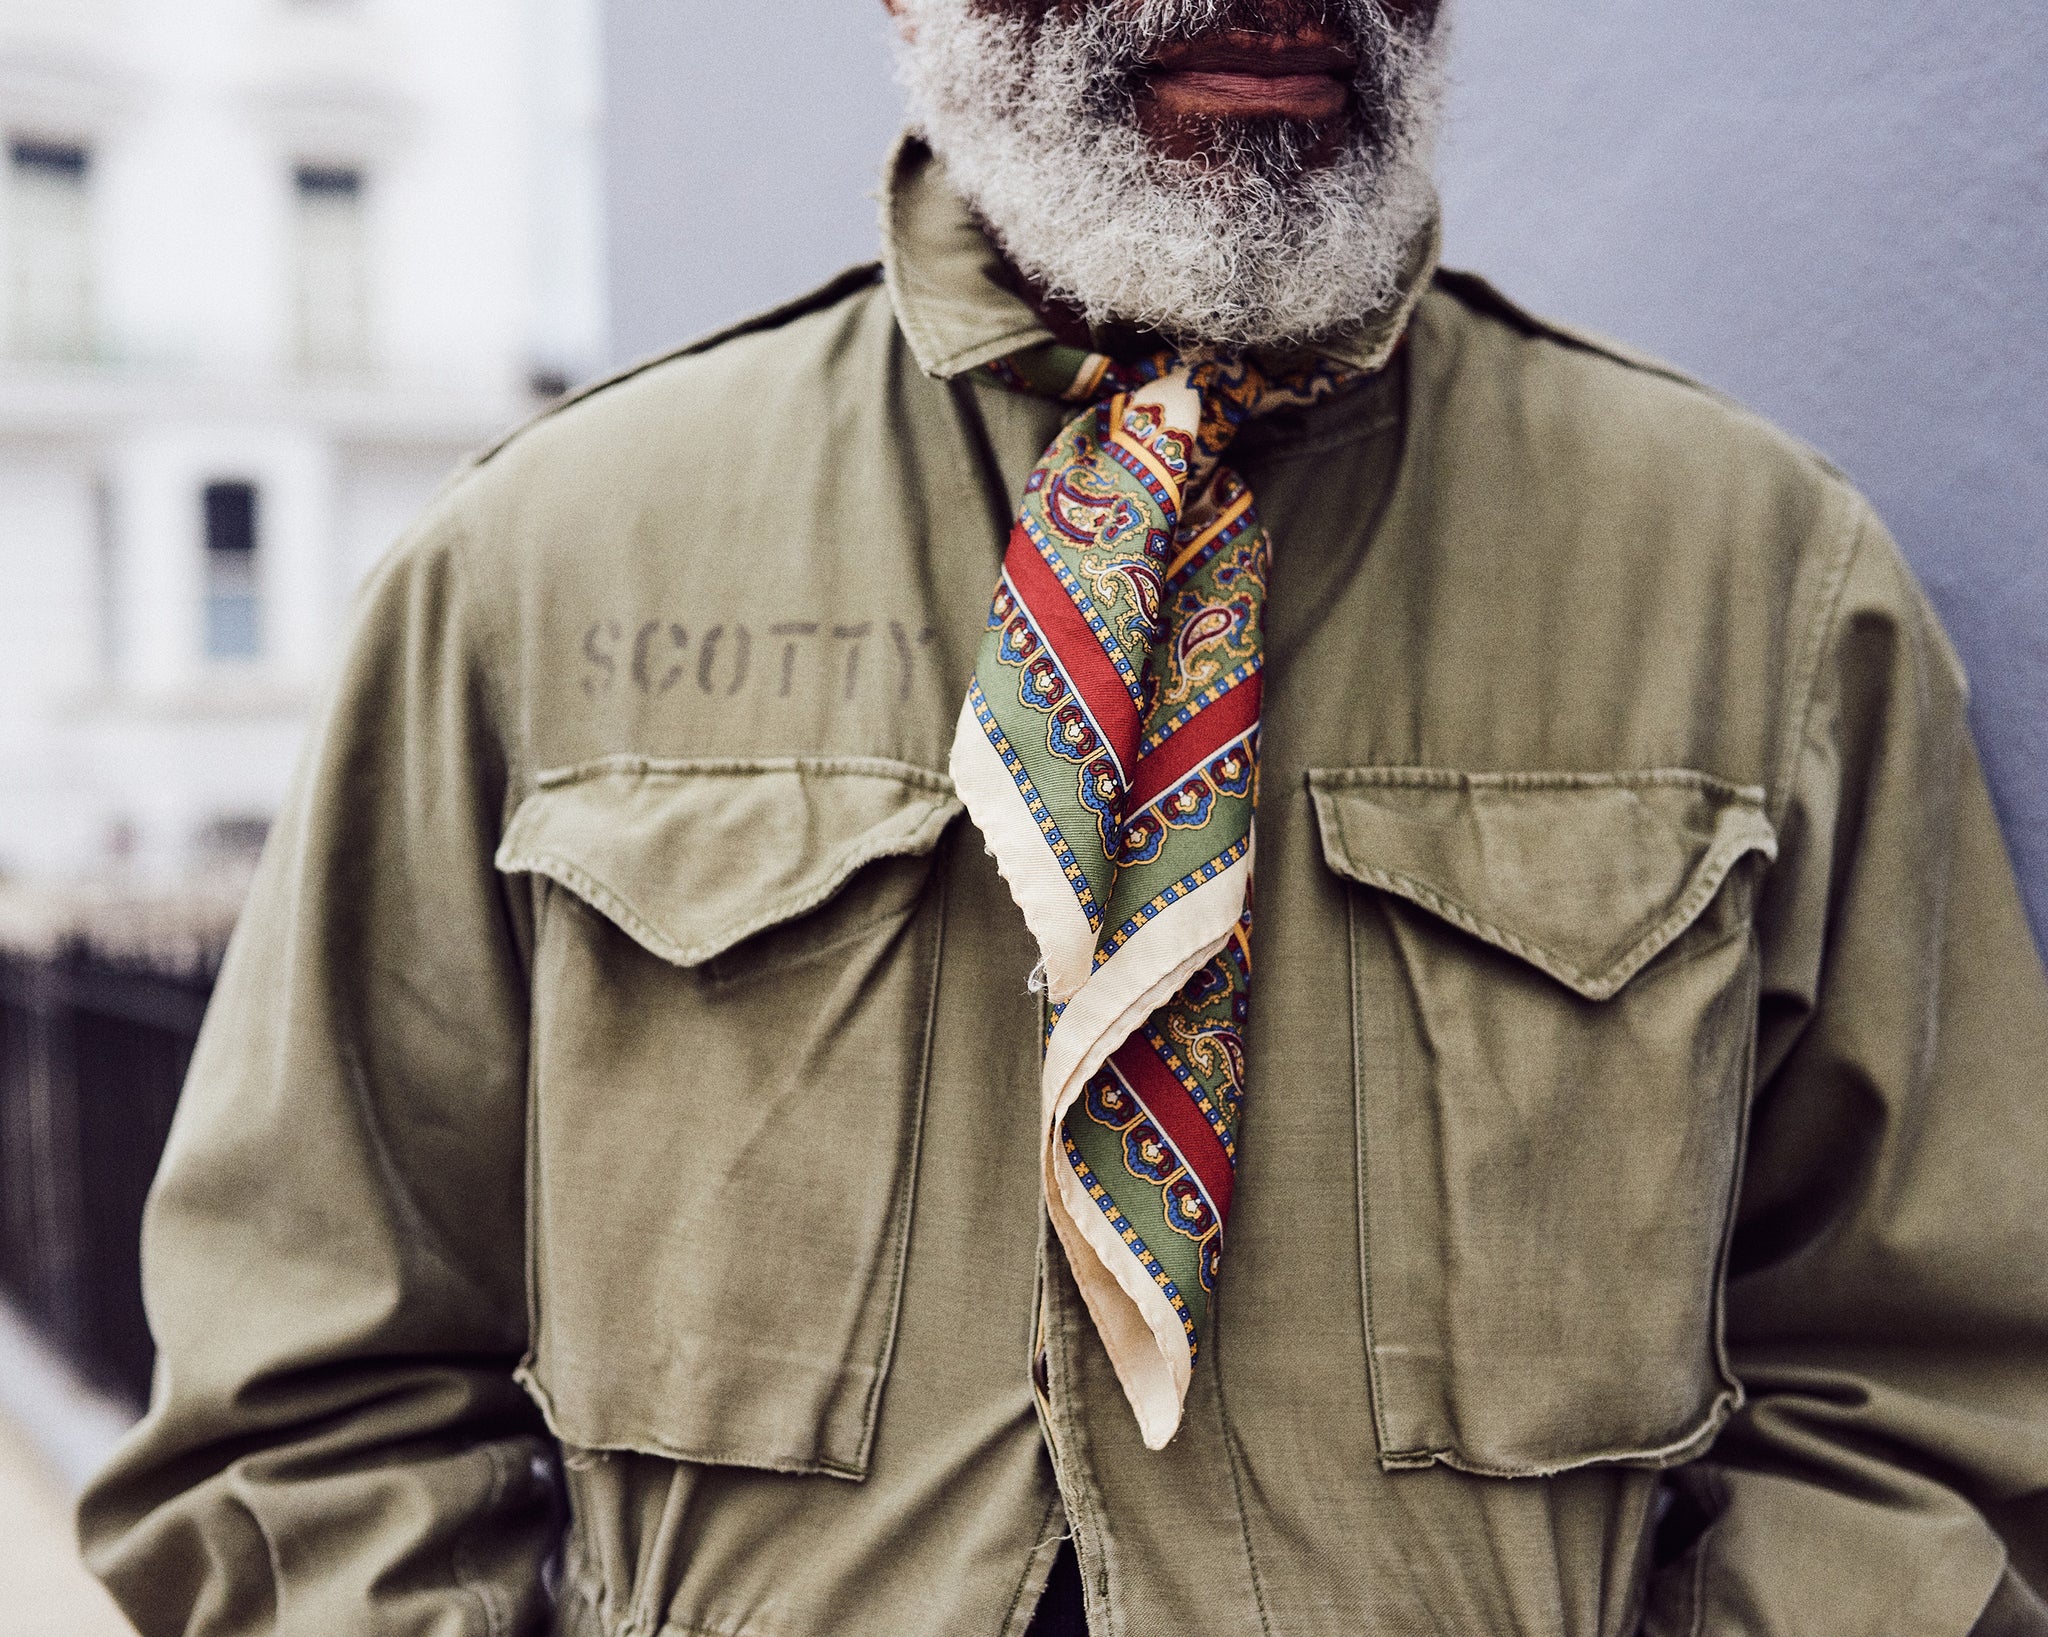 Jason Jules against a dark background, discussing Ivy Style and his interest in African American fashion. Read the interview at A Collected Man London.